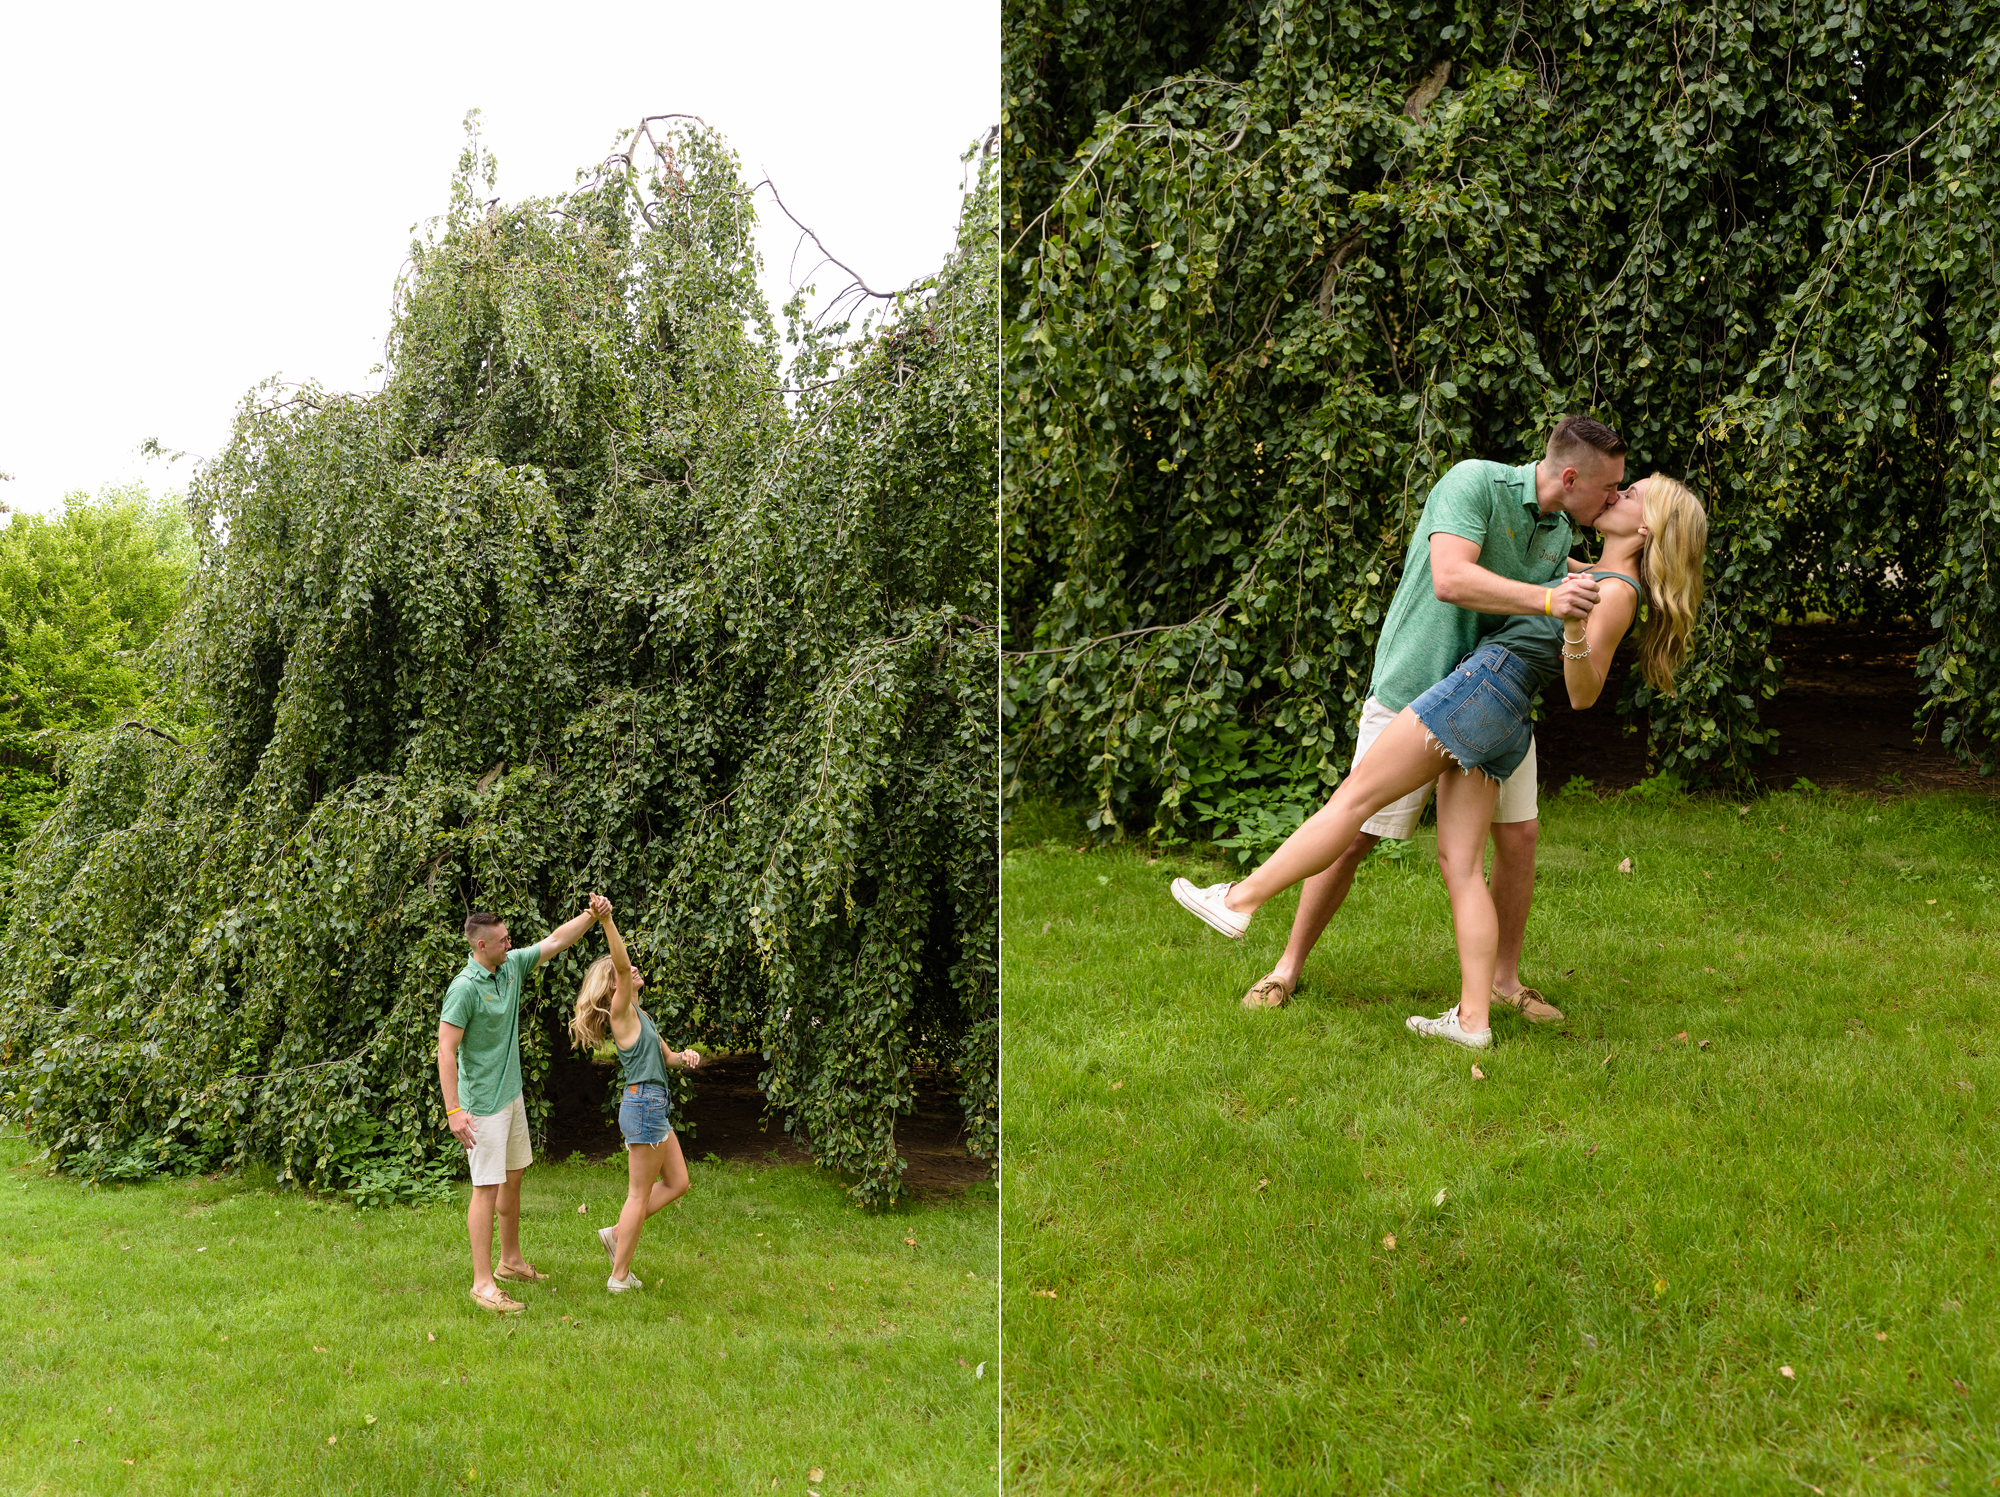 Newly engaged couple posed for photos in front of an exotic California inspired tree after he proposed on the campus of University of Notre Dame